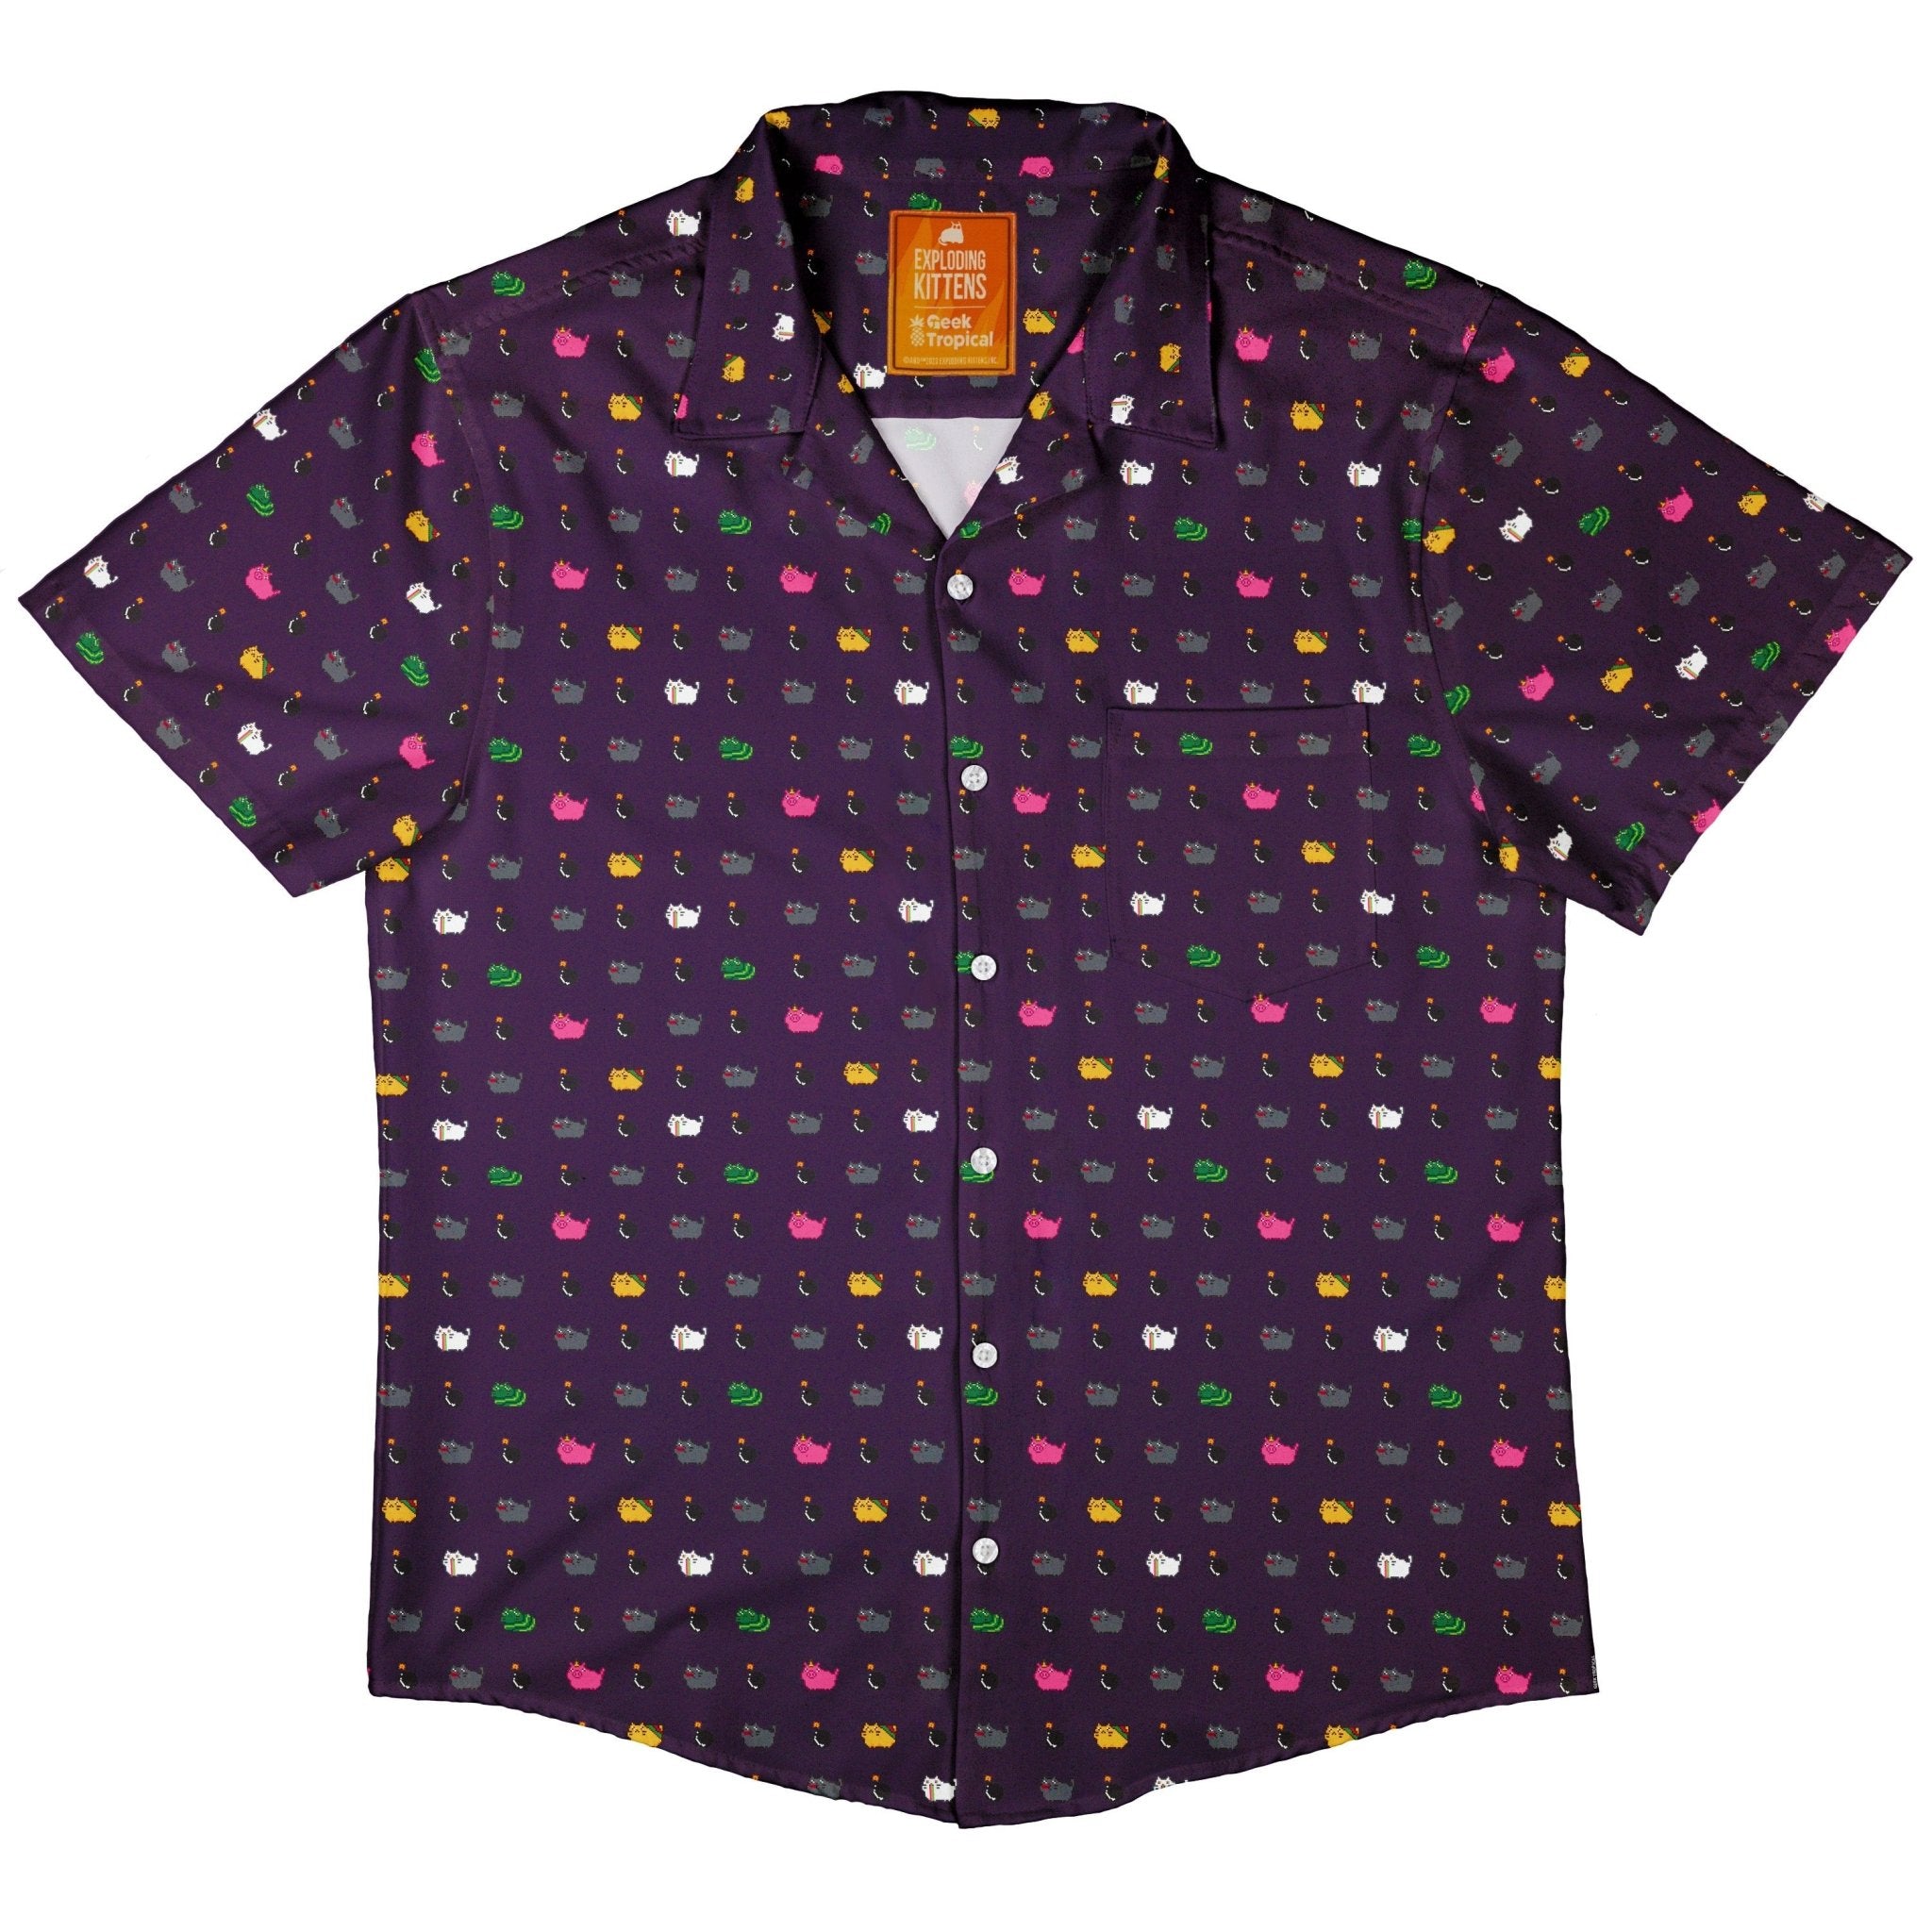 Exploding Kittens Pixel Cats Dark Button Up Shirt - adult sizing - Animal Patterns - board game print